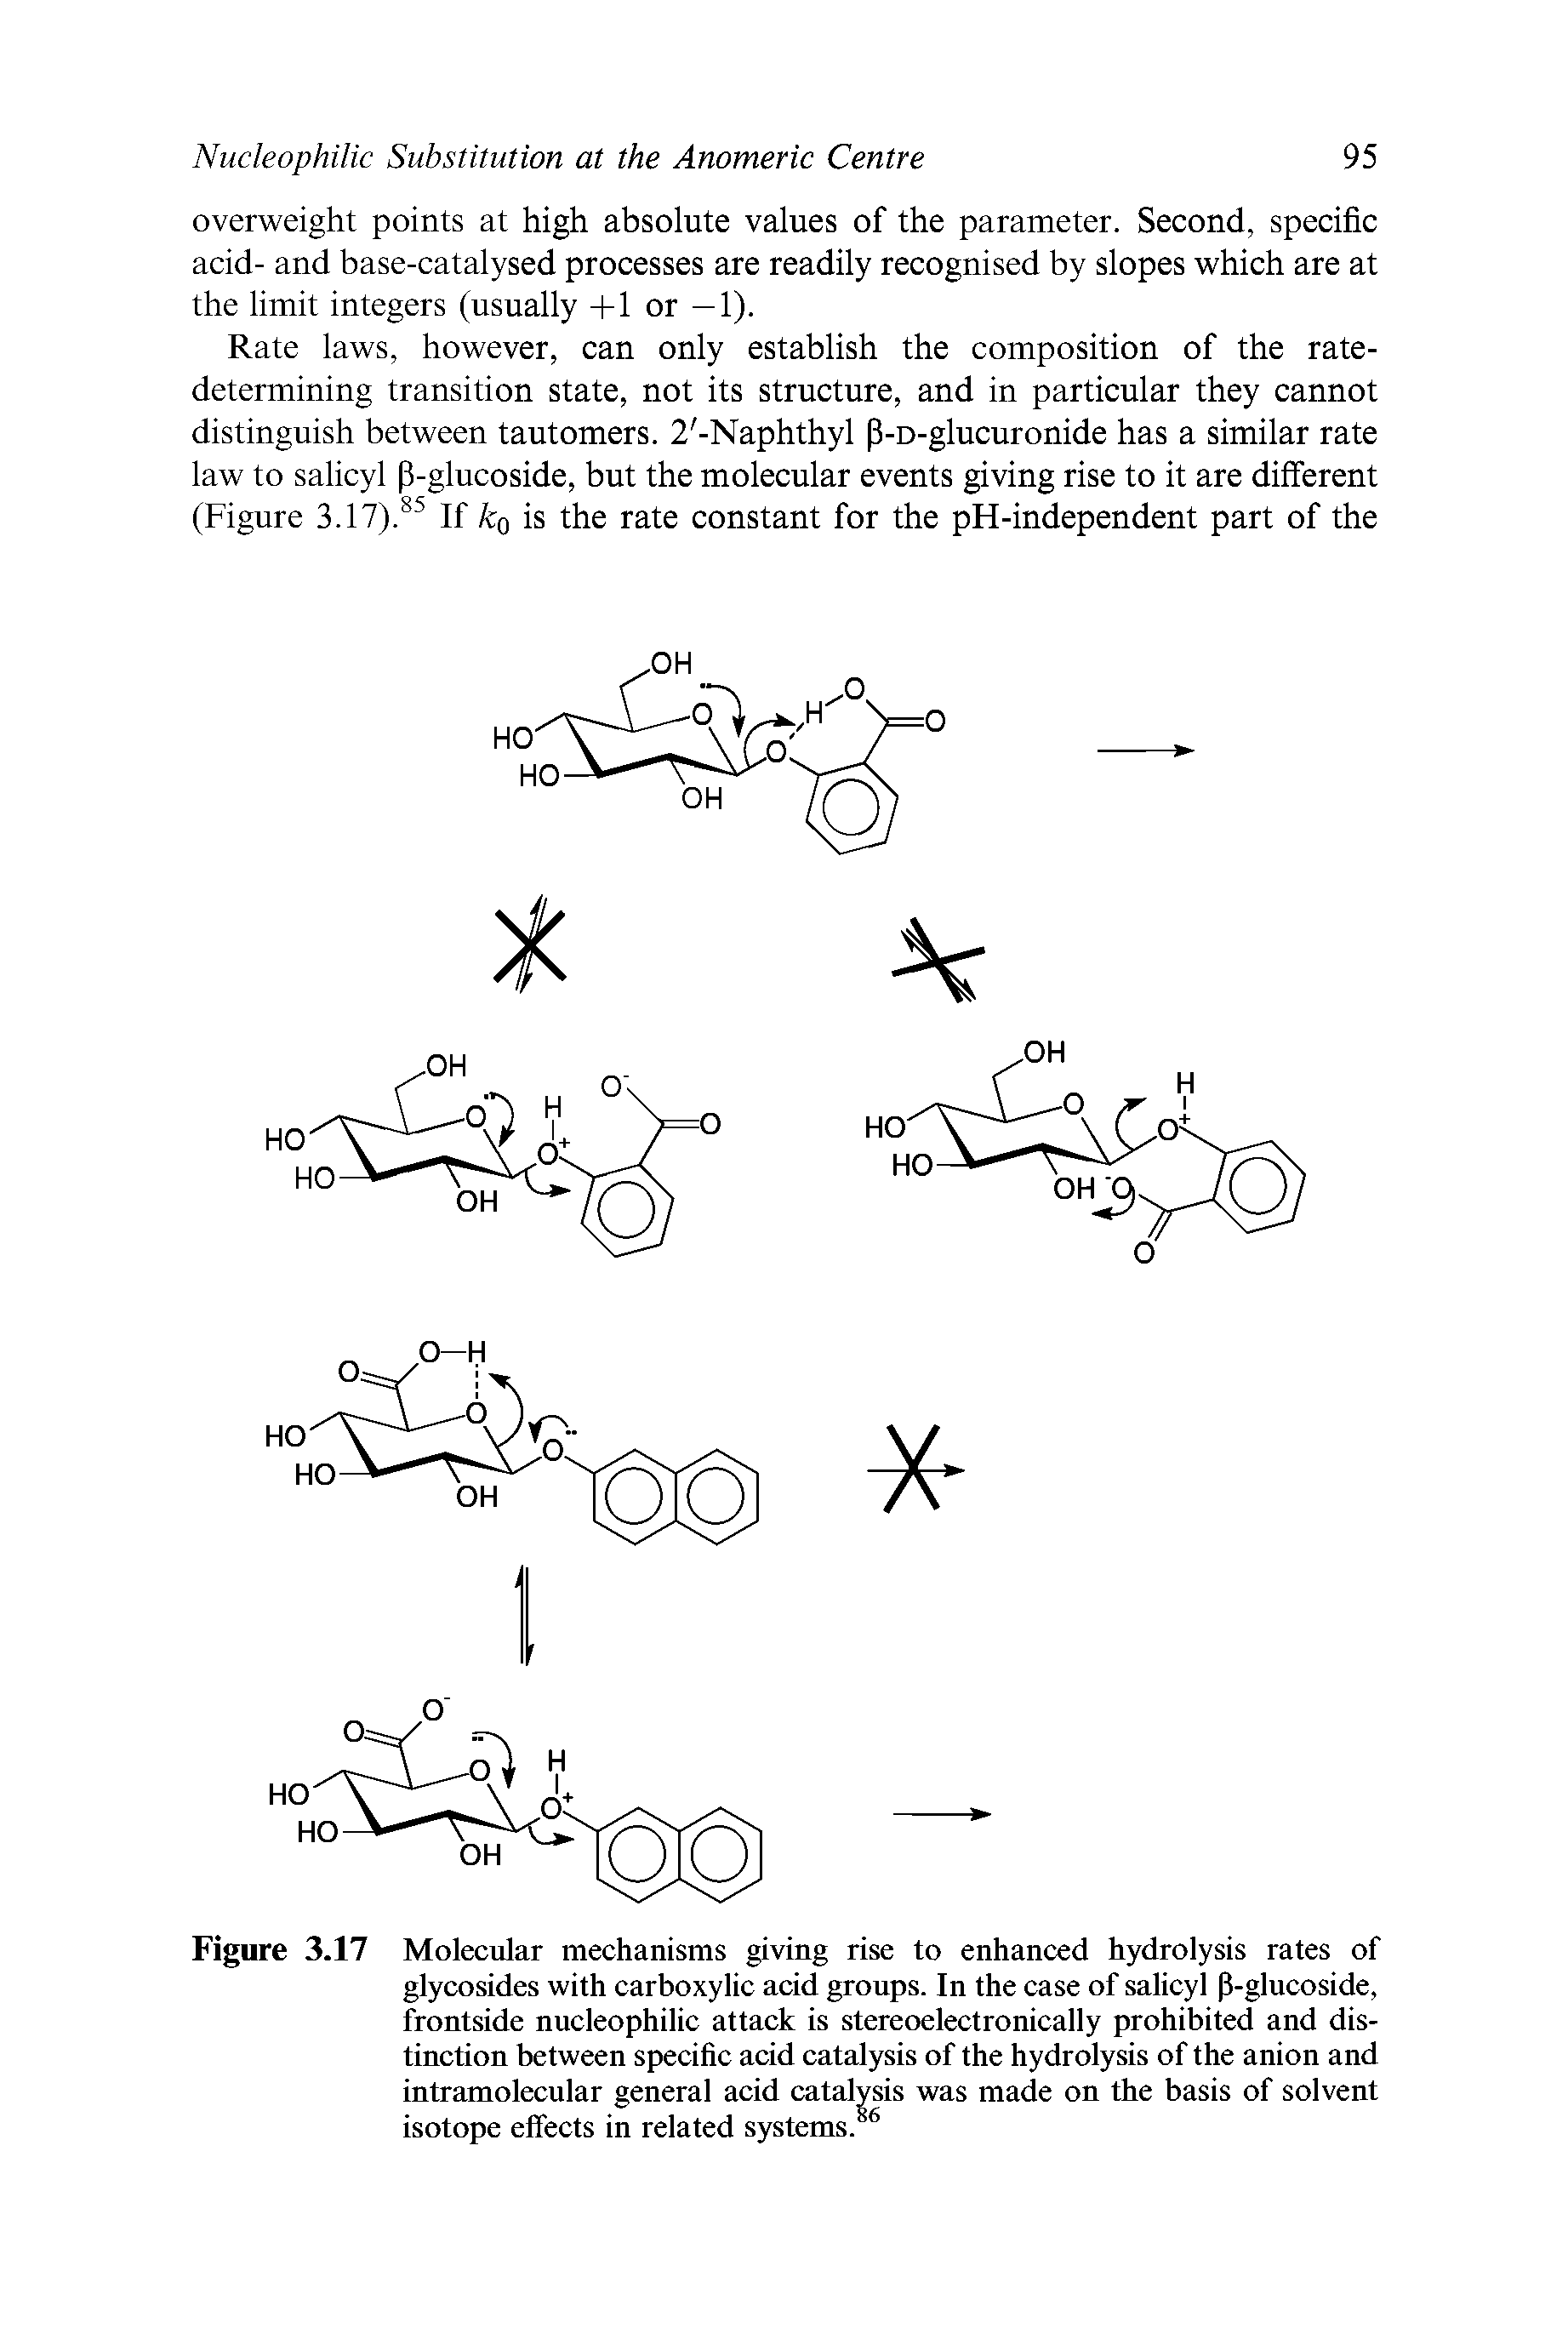 Figure 3.17 Molecular mechanisms giving rise to enhanced hydrolysis rates of glycosides with carboxylic acid groups. In the case of salicyl fi-glucoside, frontside nucleophilic attack is stereoelectronically prohibited and distinction between specific acid catalysis of the hydrolysis of the anion and intramolecular general acid catalysis was made on the basis of solvent isotope effects in related systems. ...